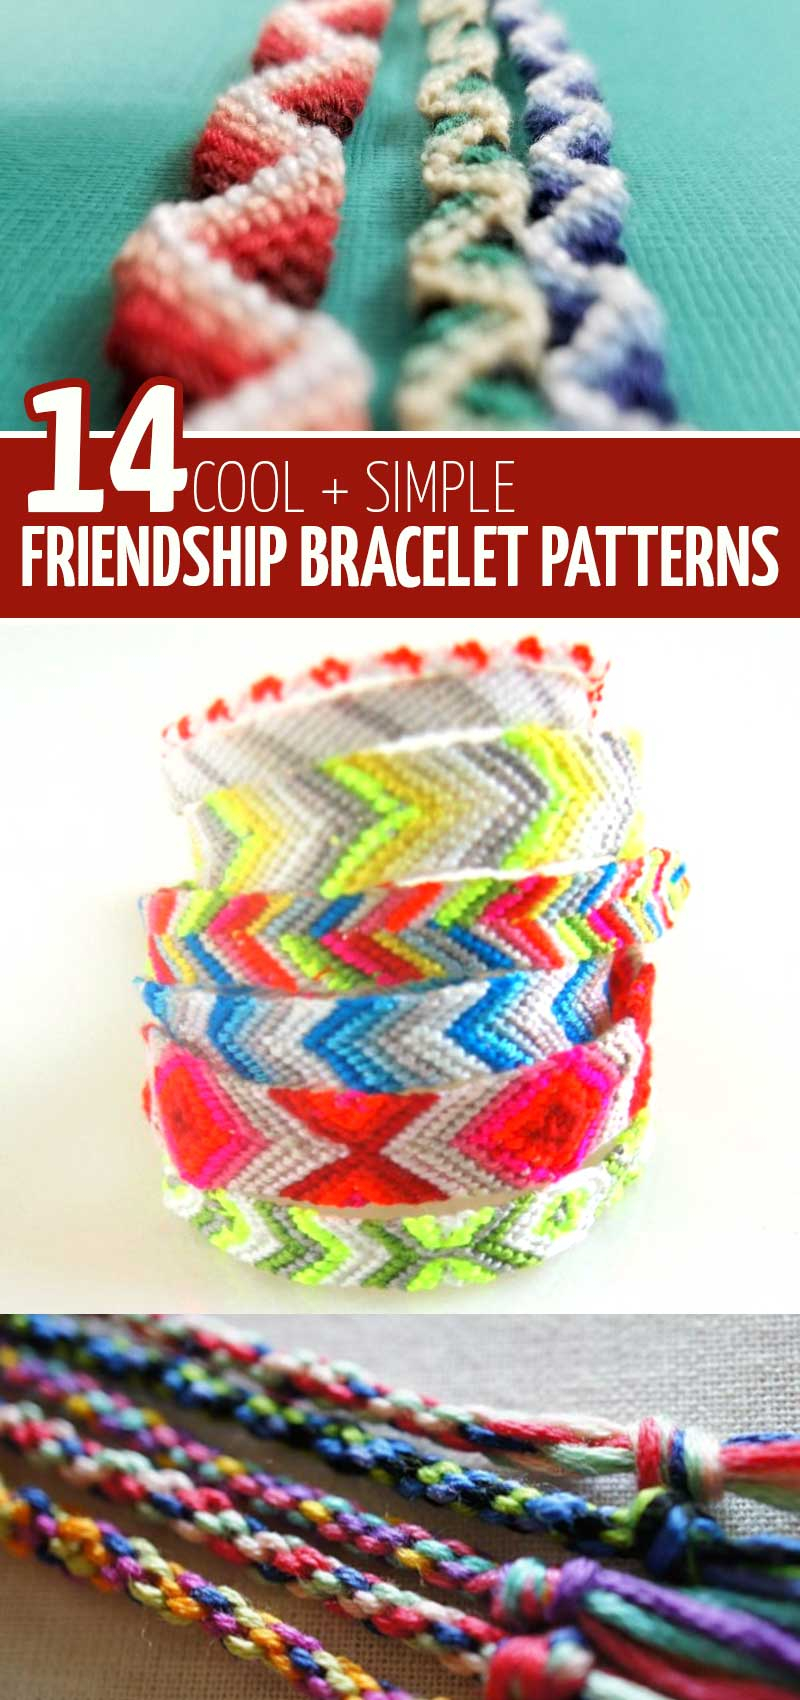 Bracelet Patterns With Embroidery Floss Diy Friendship Bracelet Tutorials And Patterns Moms And Crafters